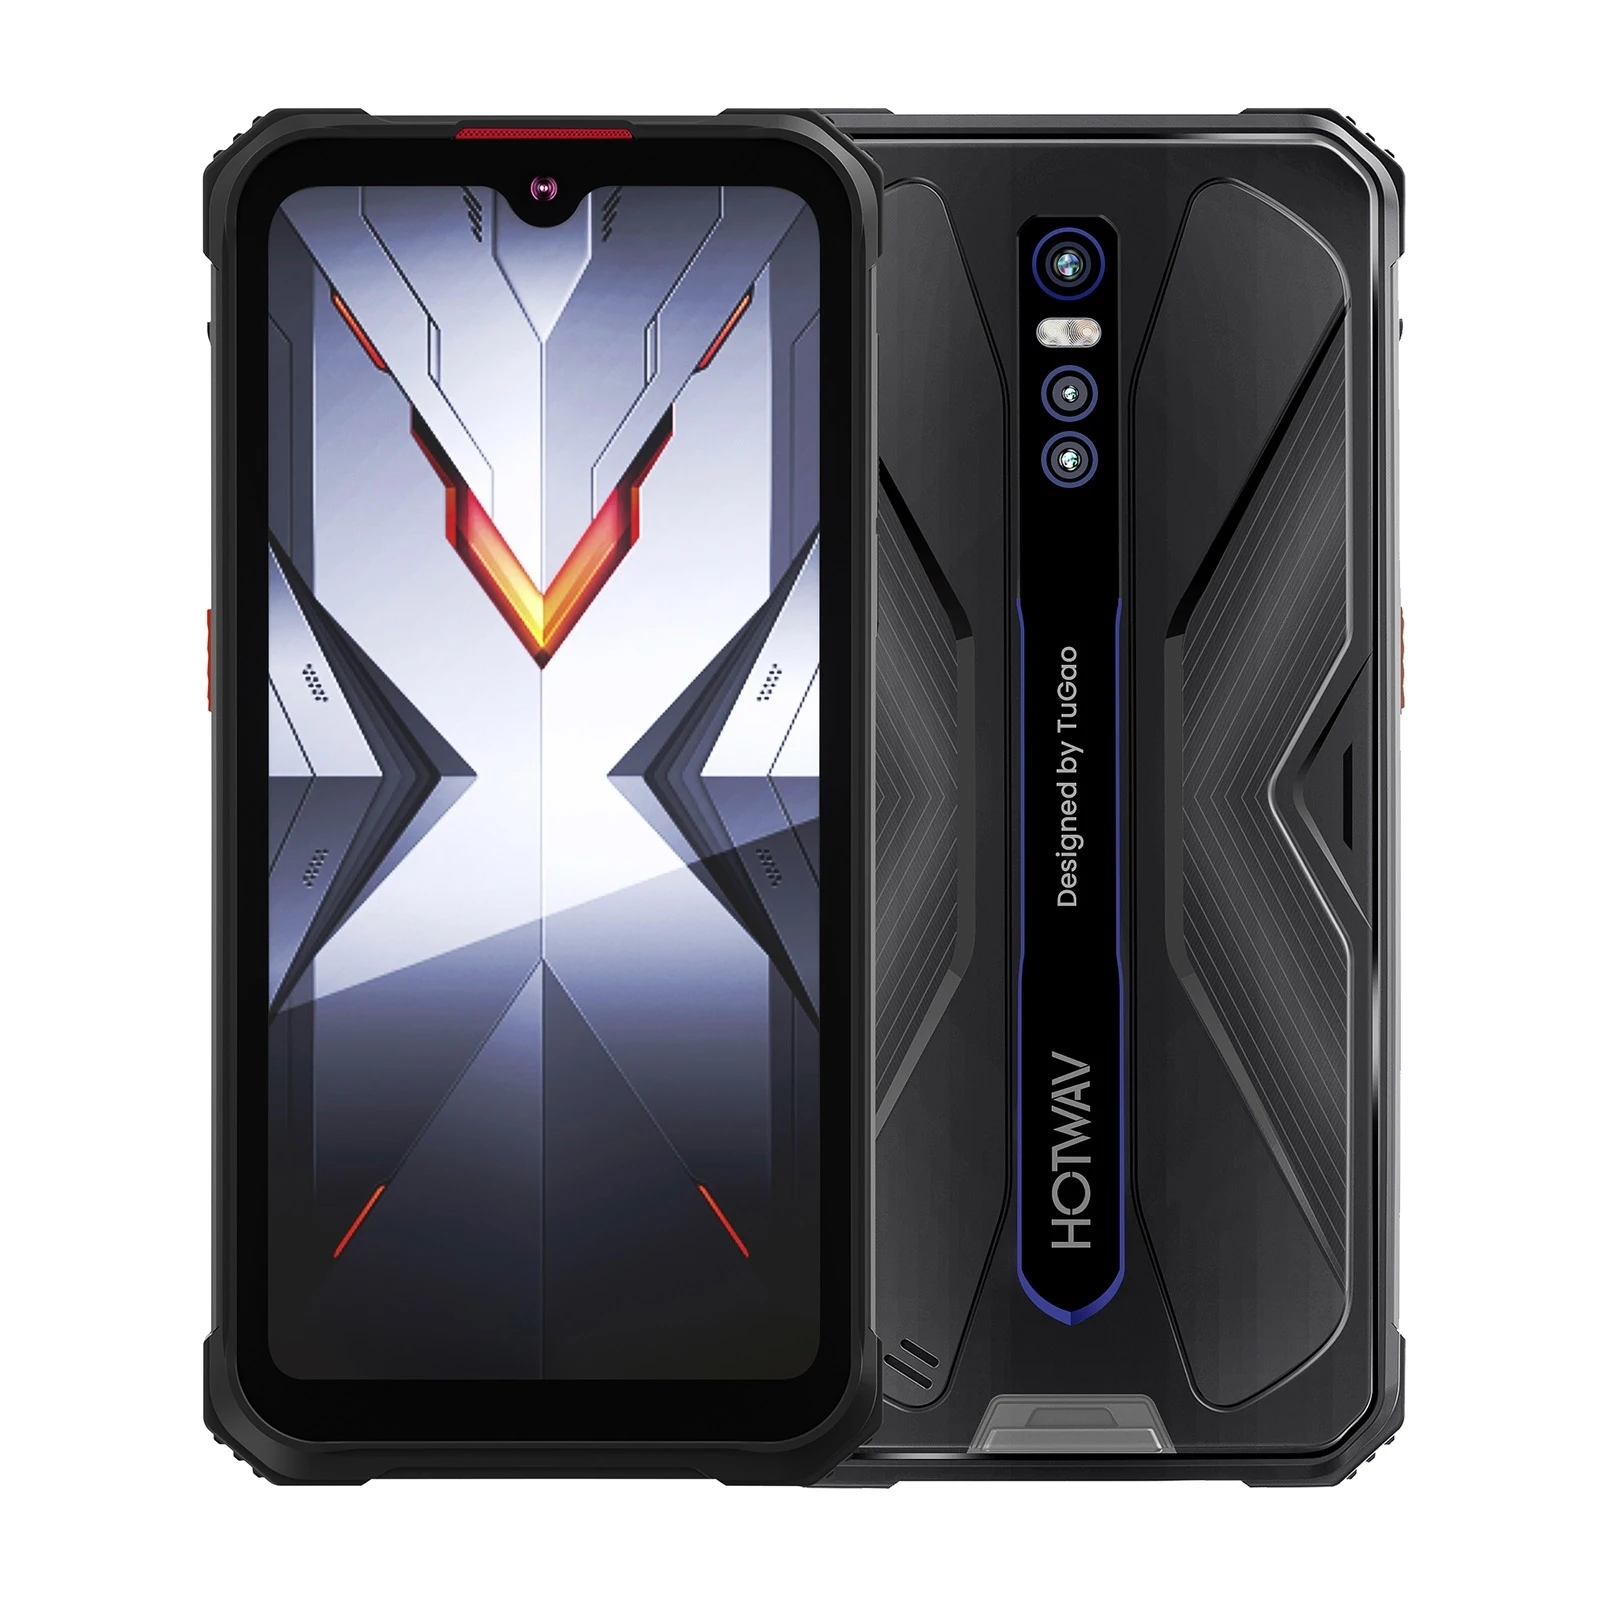 

HOTWAV CYBER 9 Pro Rugged Phone 8GB 128GB 48MP Cameras IP68 Waterproof 7500mAh Battery 6.3 inch Android 11 4G Smartphone